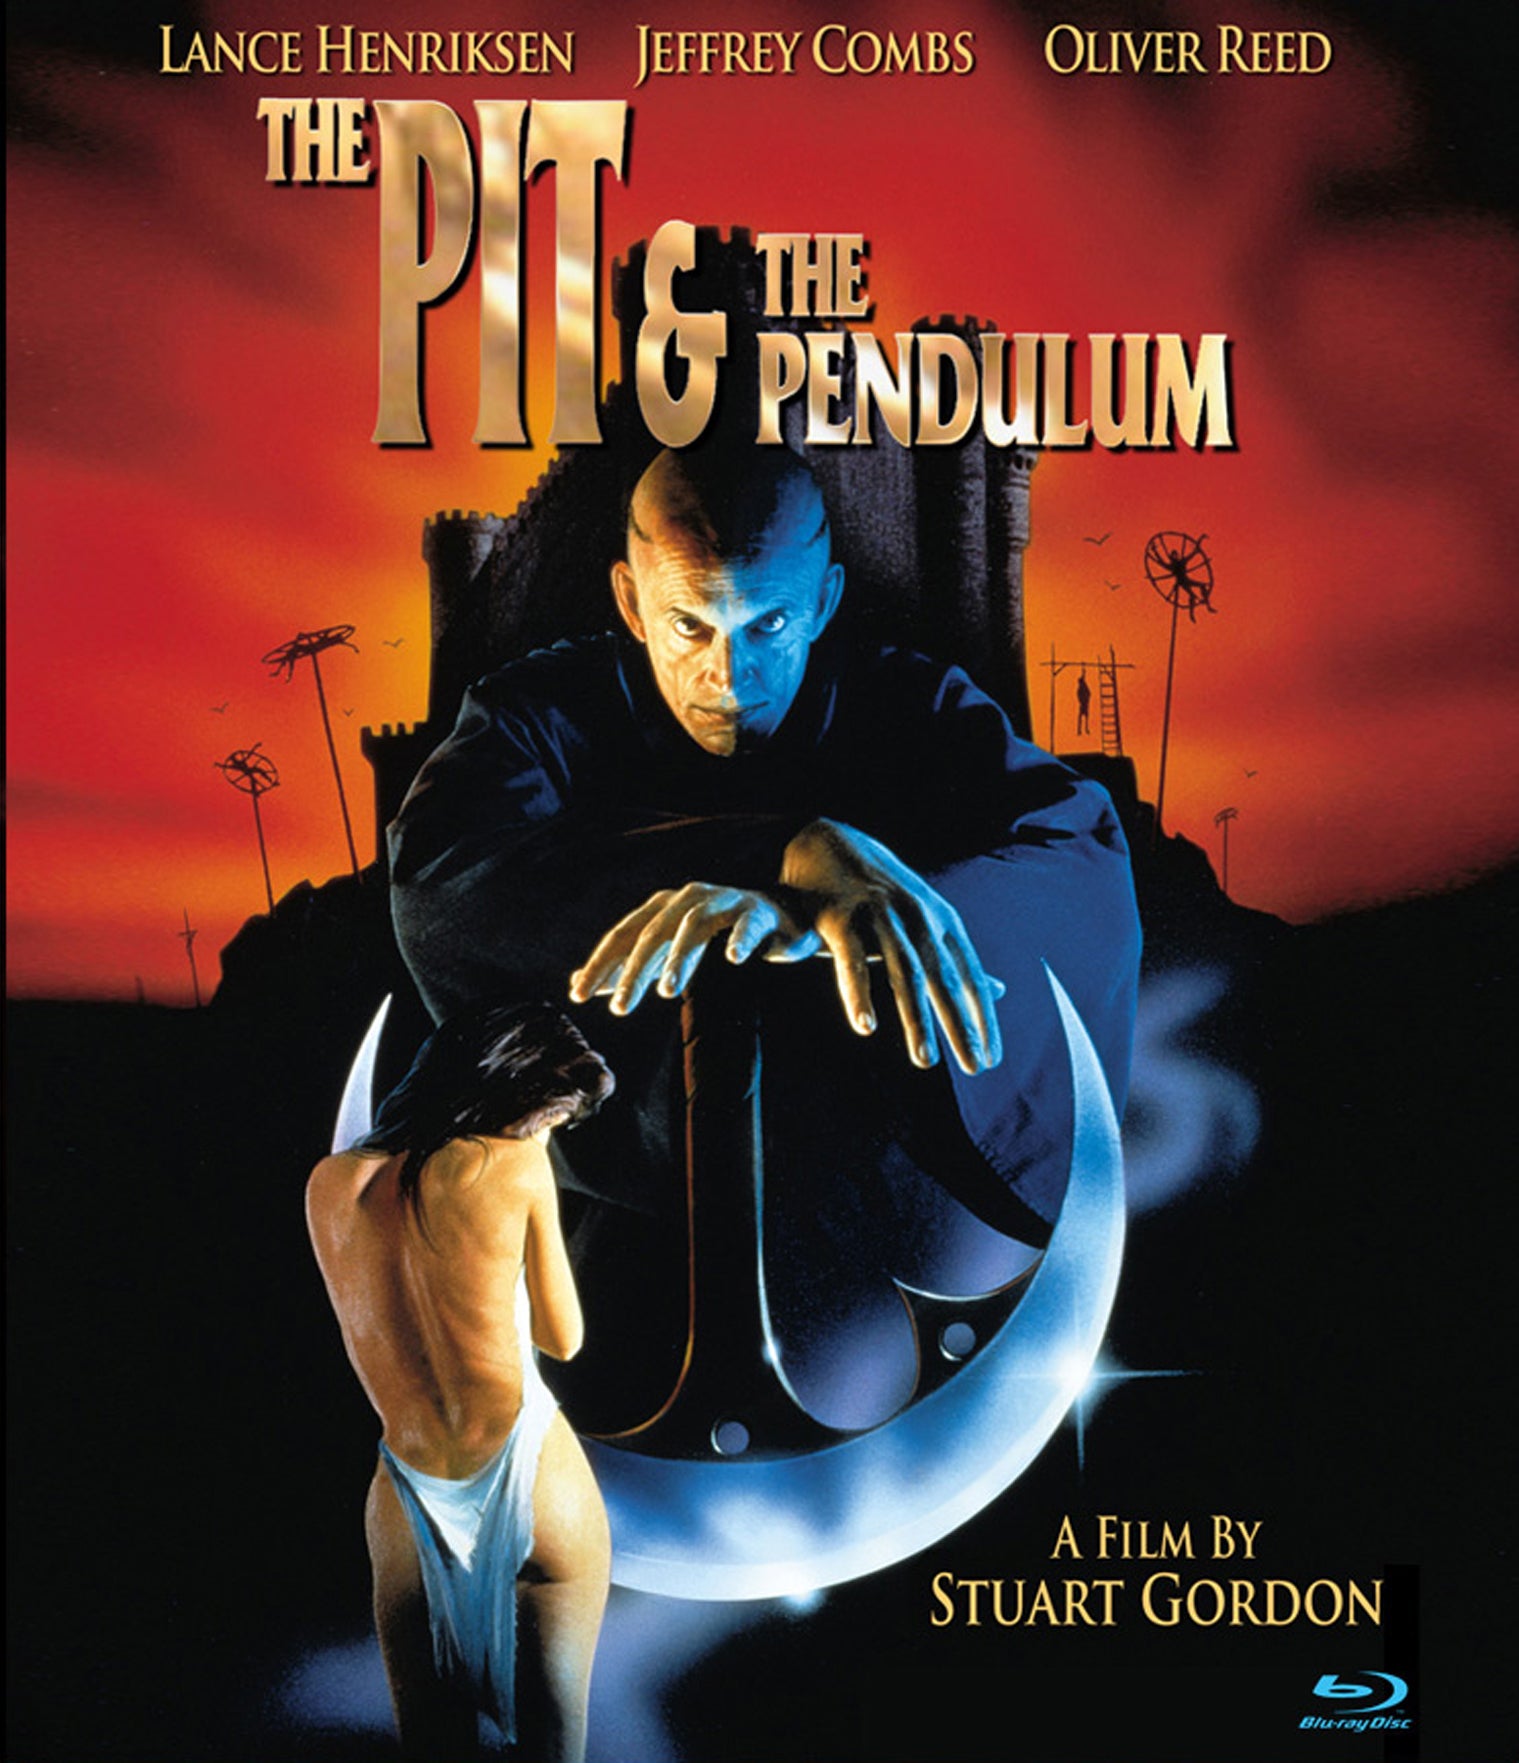 THE PIT AND THE PENDULUM BLU-RAY